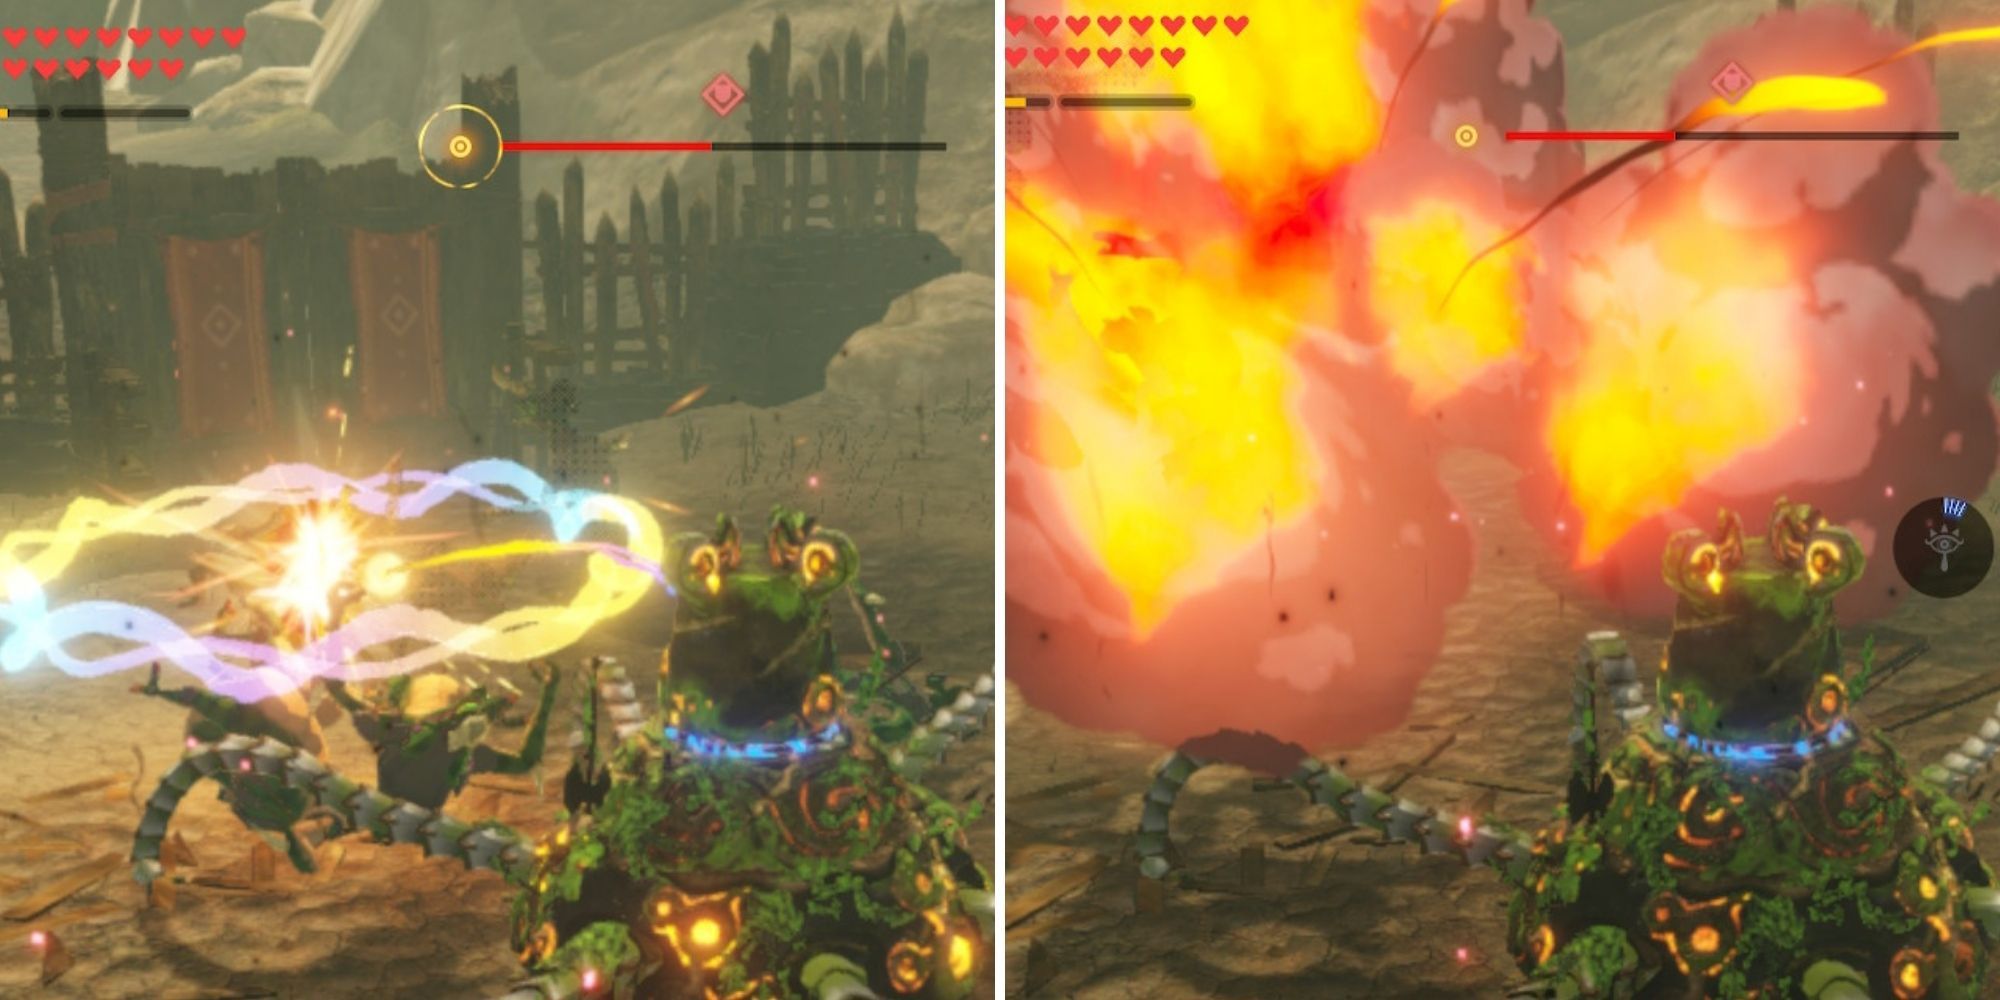 Hyrule Warriors Age of Calamity - Battle-Tested Guardian using Magnesis (mid-use on left, explosion on right)